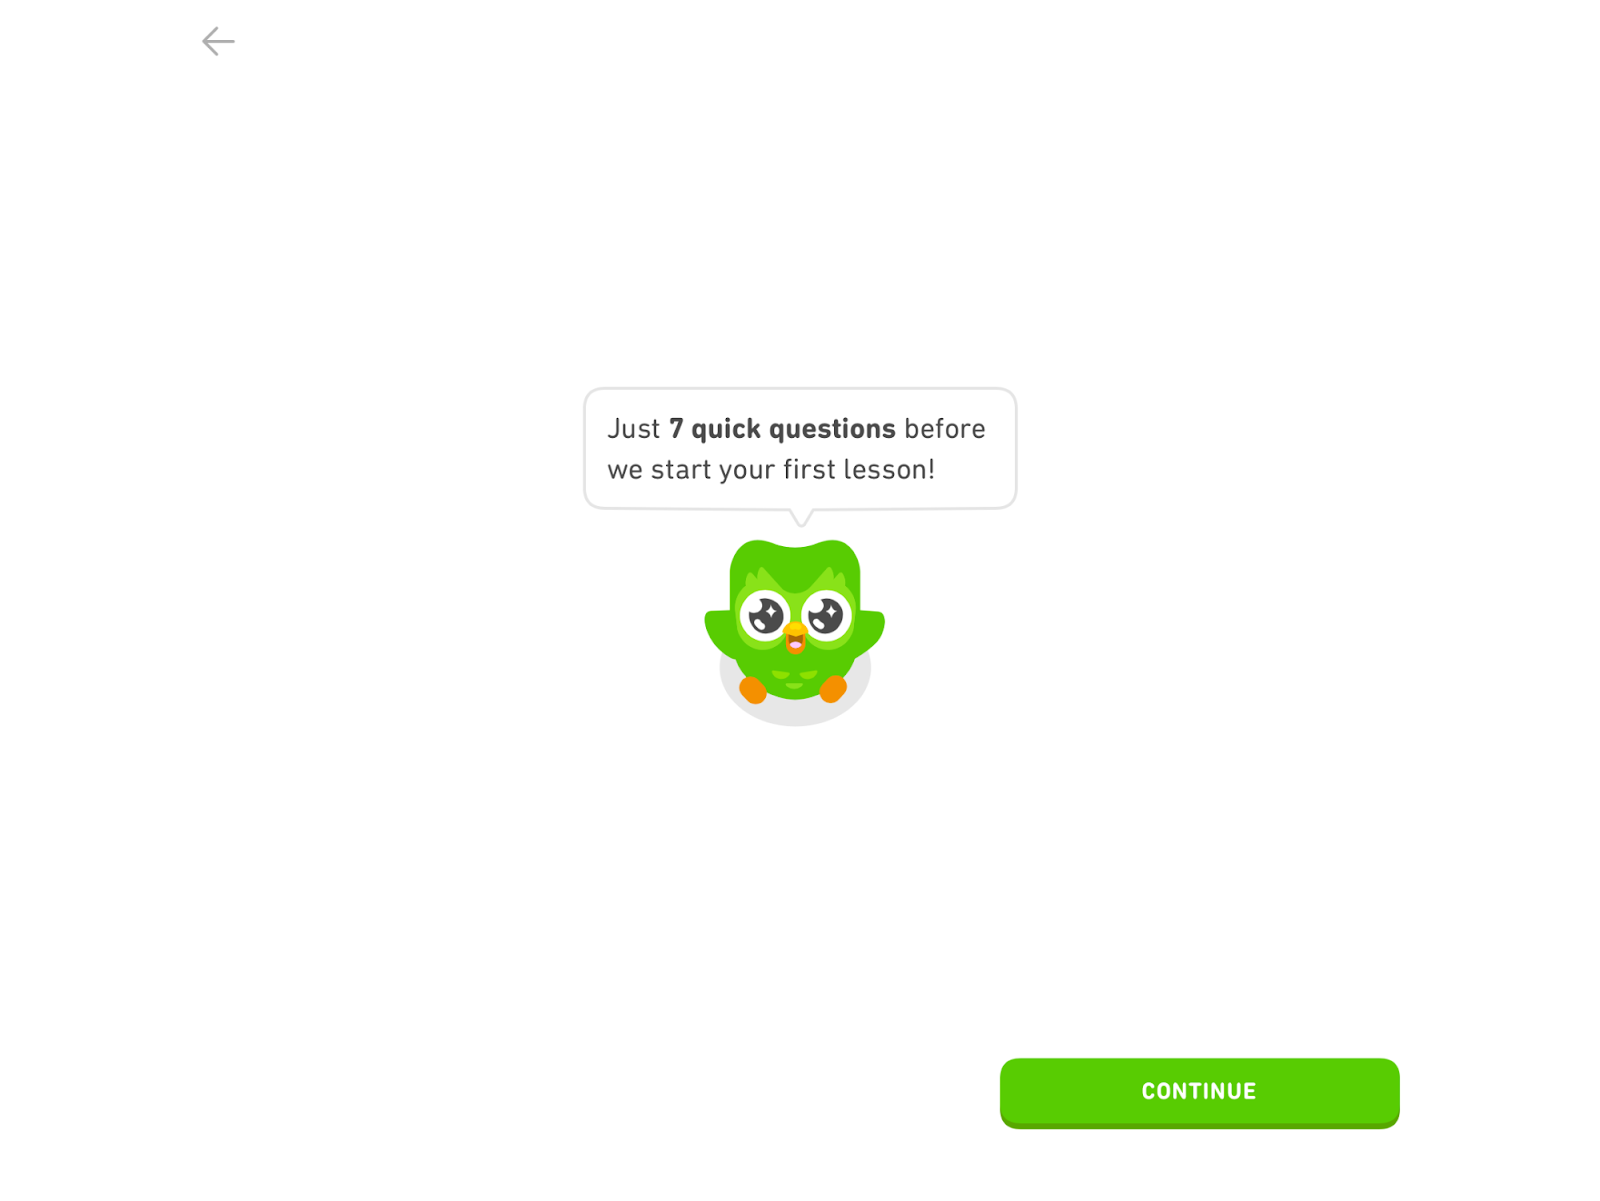 Example of company onboarding process from Duolingo